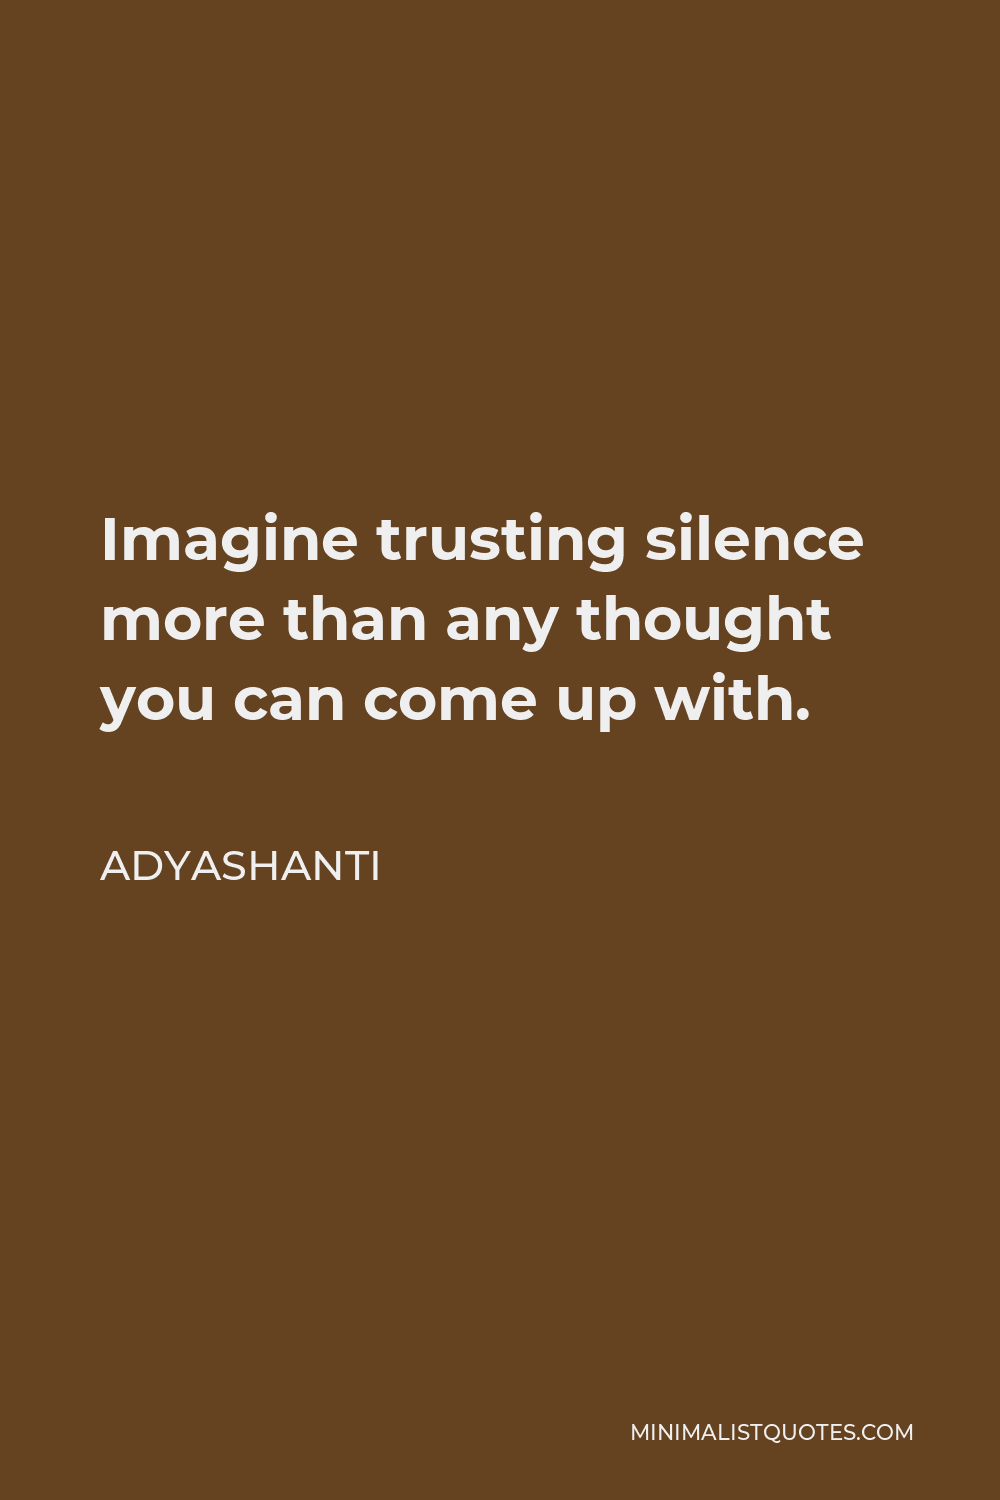 Adyashanti Quote - Imagine trusting silence more than any thought you can come up with.